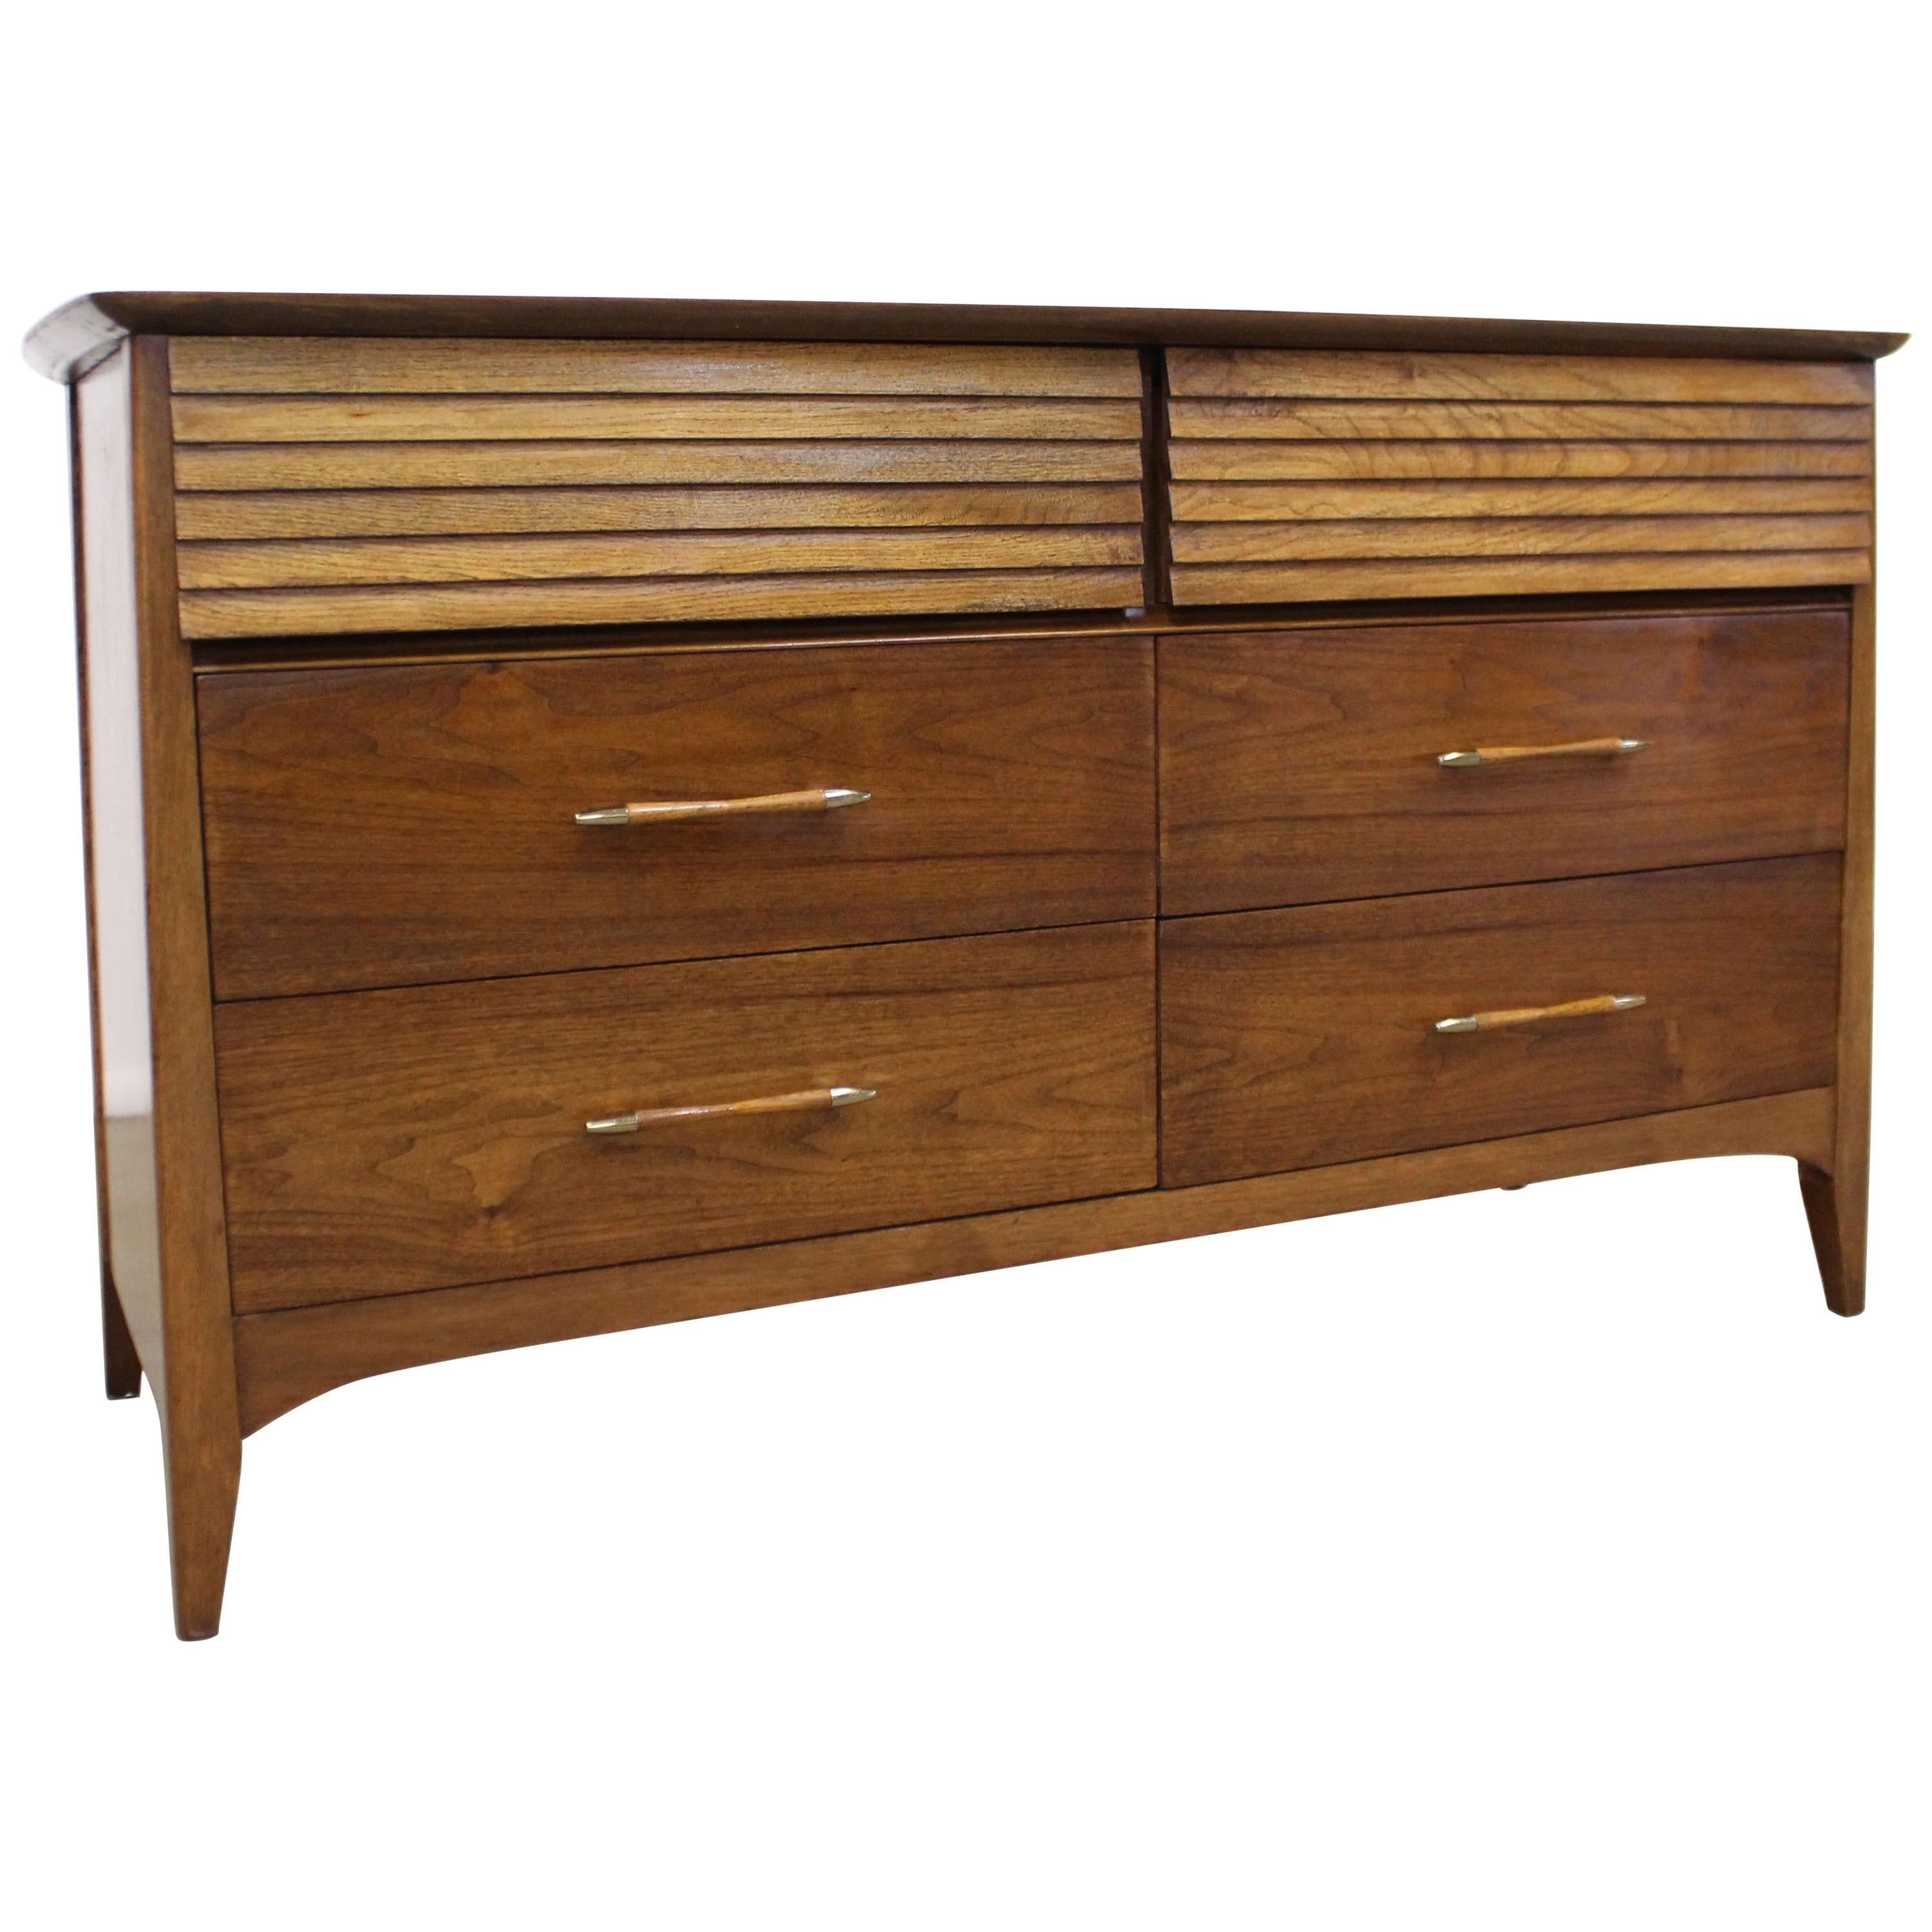 Harmony House Dressers 2 For At, Harmony House Dresser